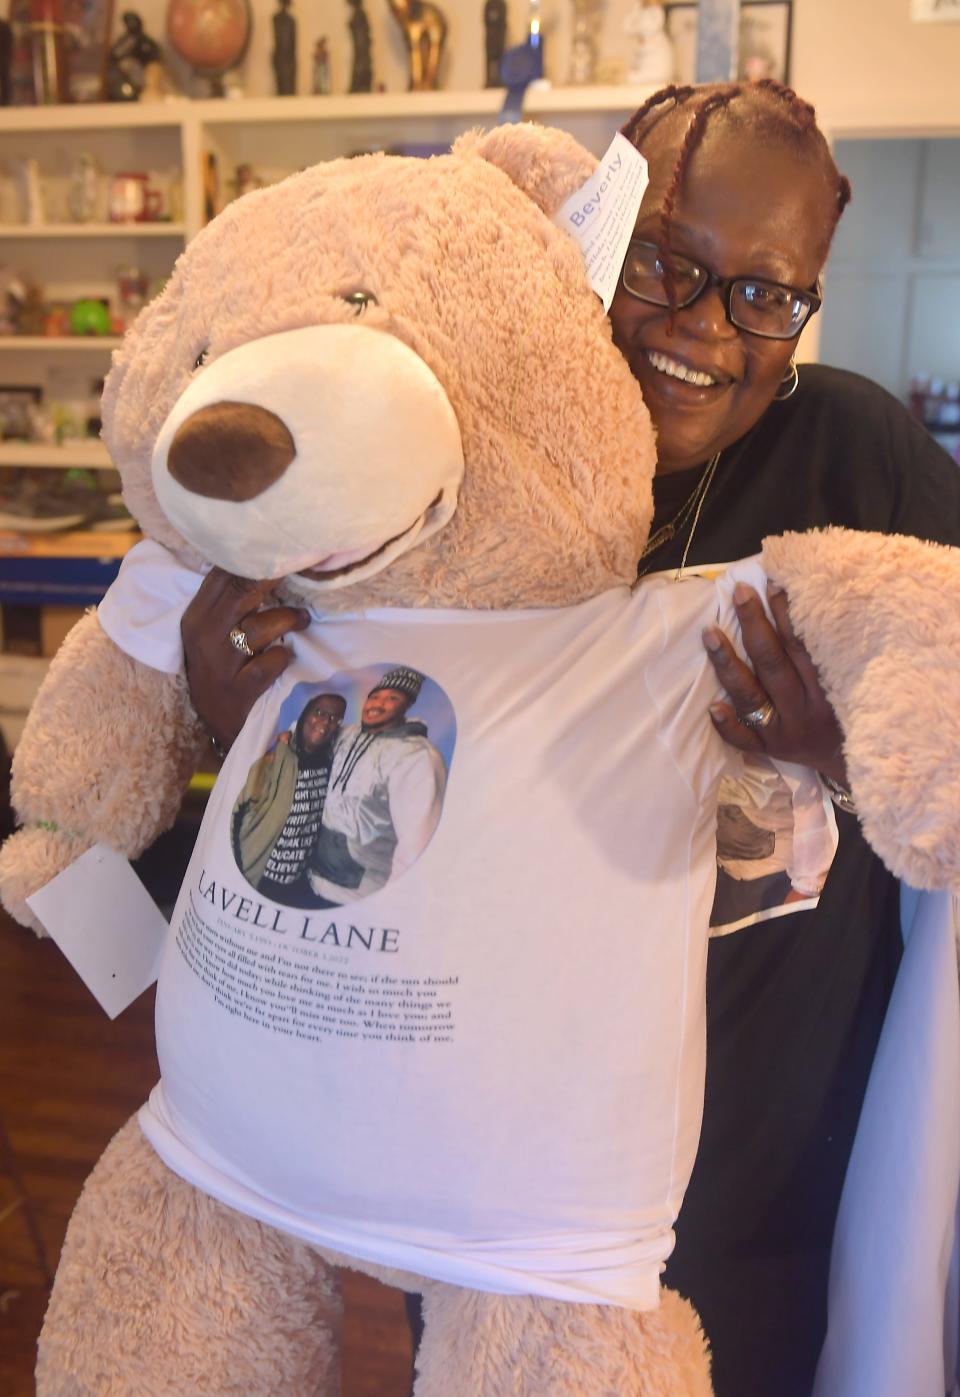 The parents of Lavell Lane, Andy Reese and Beverly Reese Lane talk about their son's life and the events surrounding his death. Lavell Lane died in custody at the Spartanburg County Detention Center in October 2022. Beverly Reese Lane talks about her son and holds a stuffed bear wearing an image of her with her son.